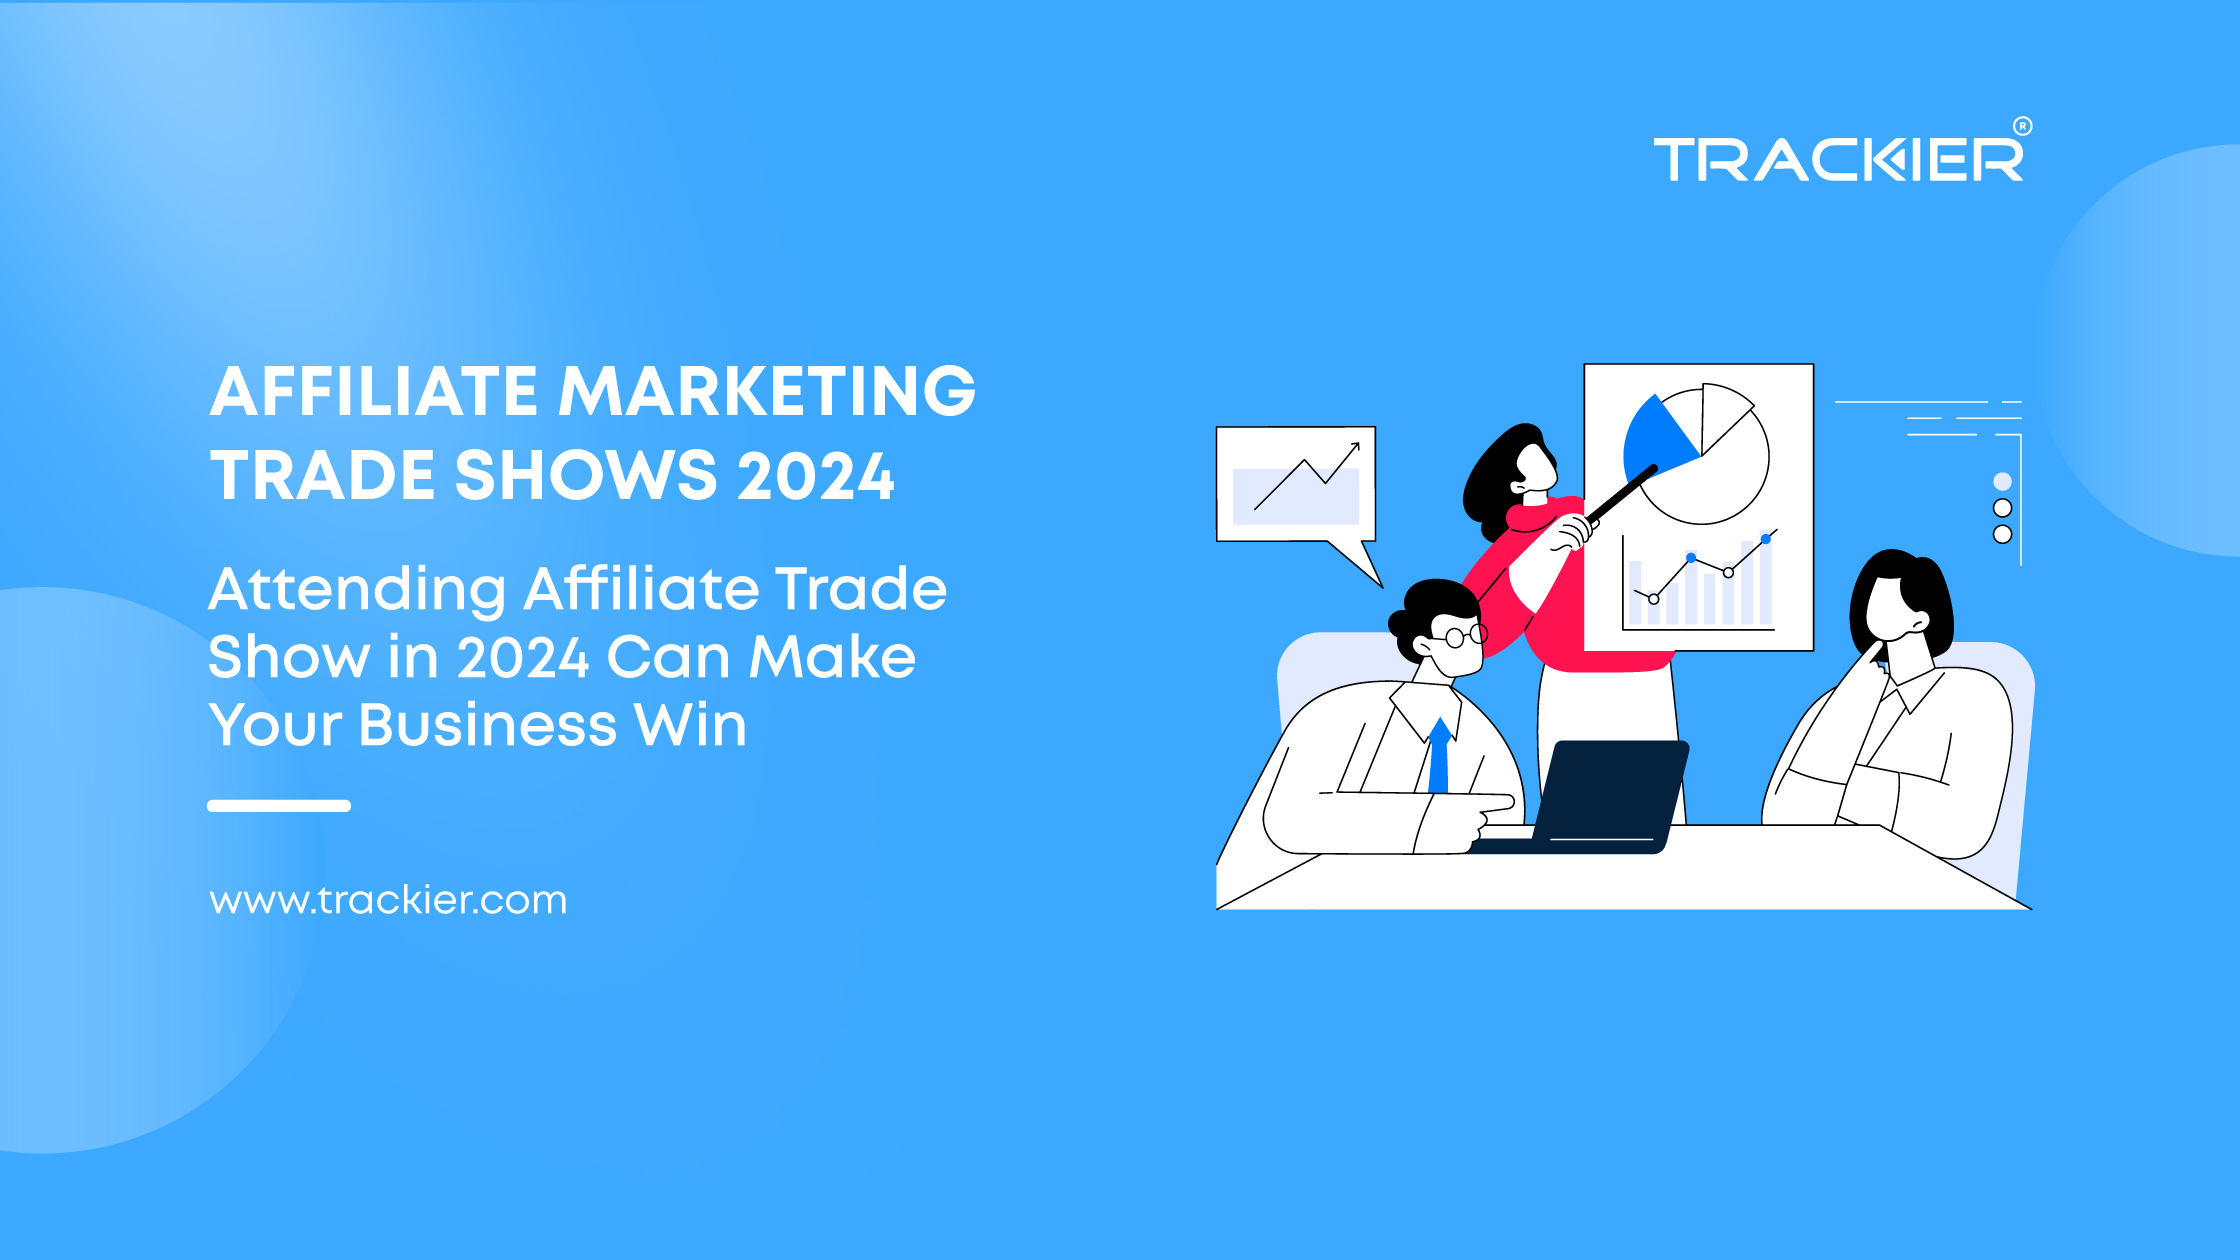 Attending affiliate marketing trade show in 2024